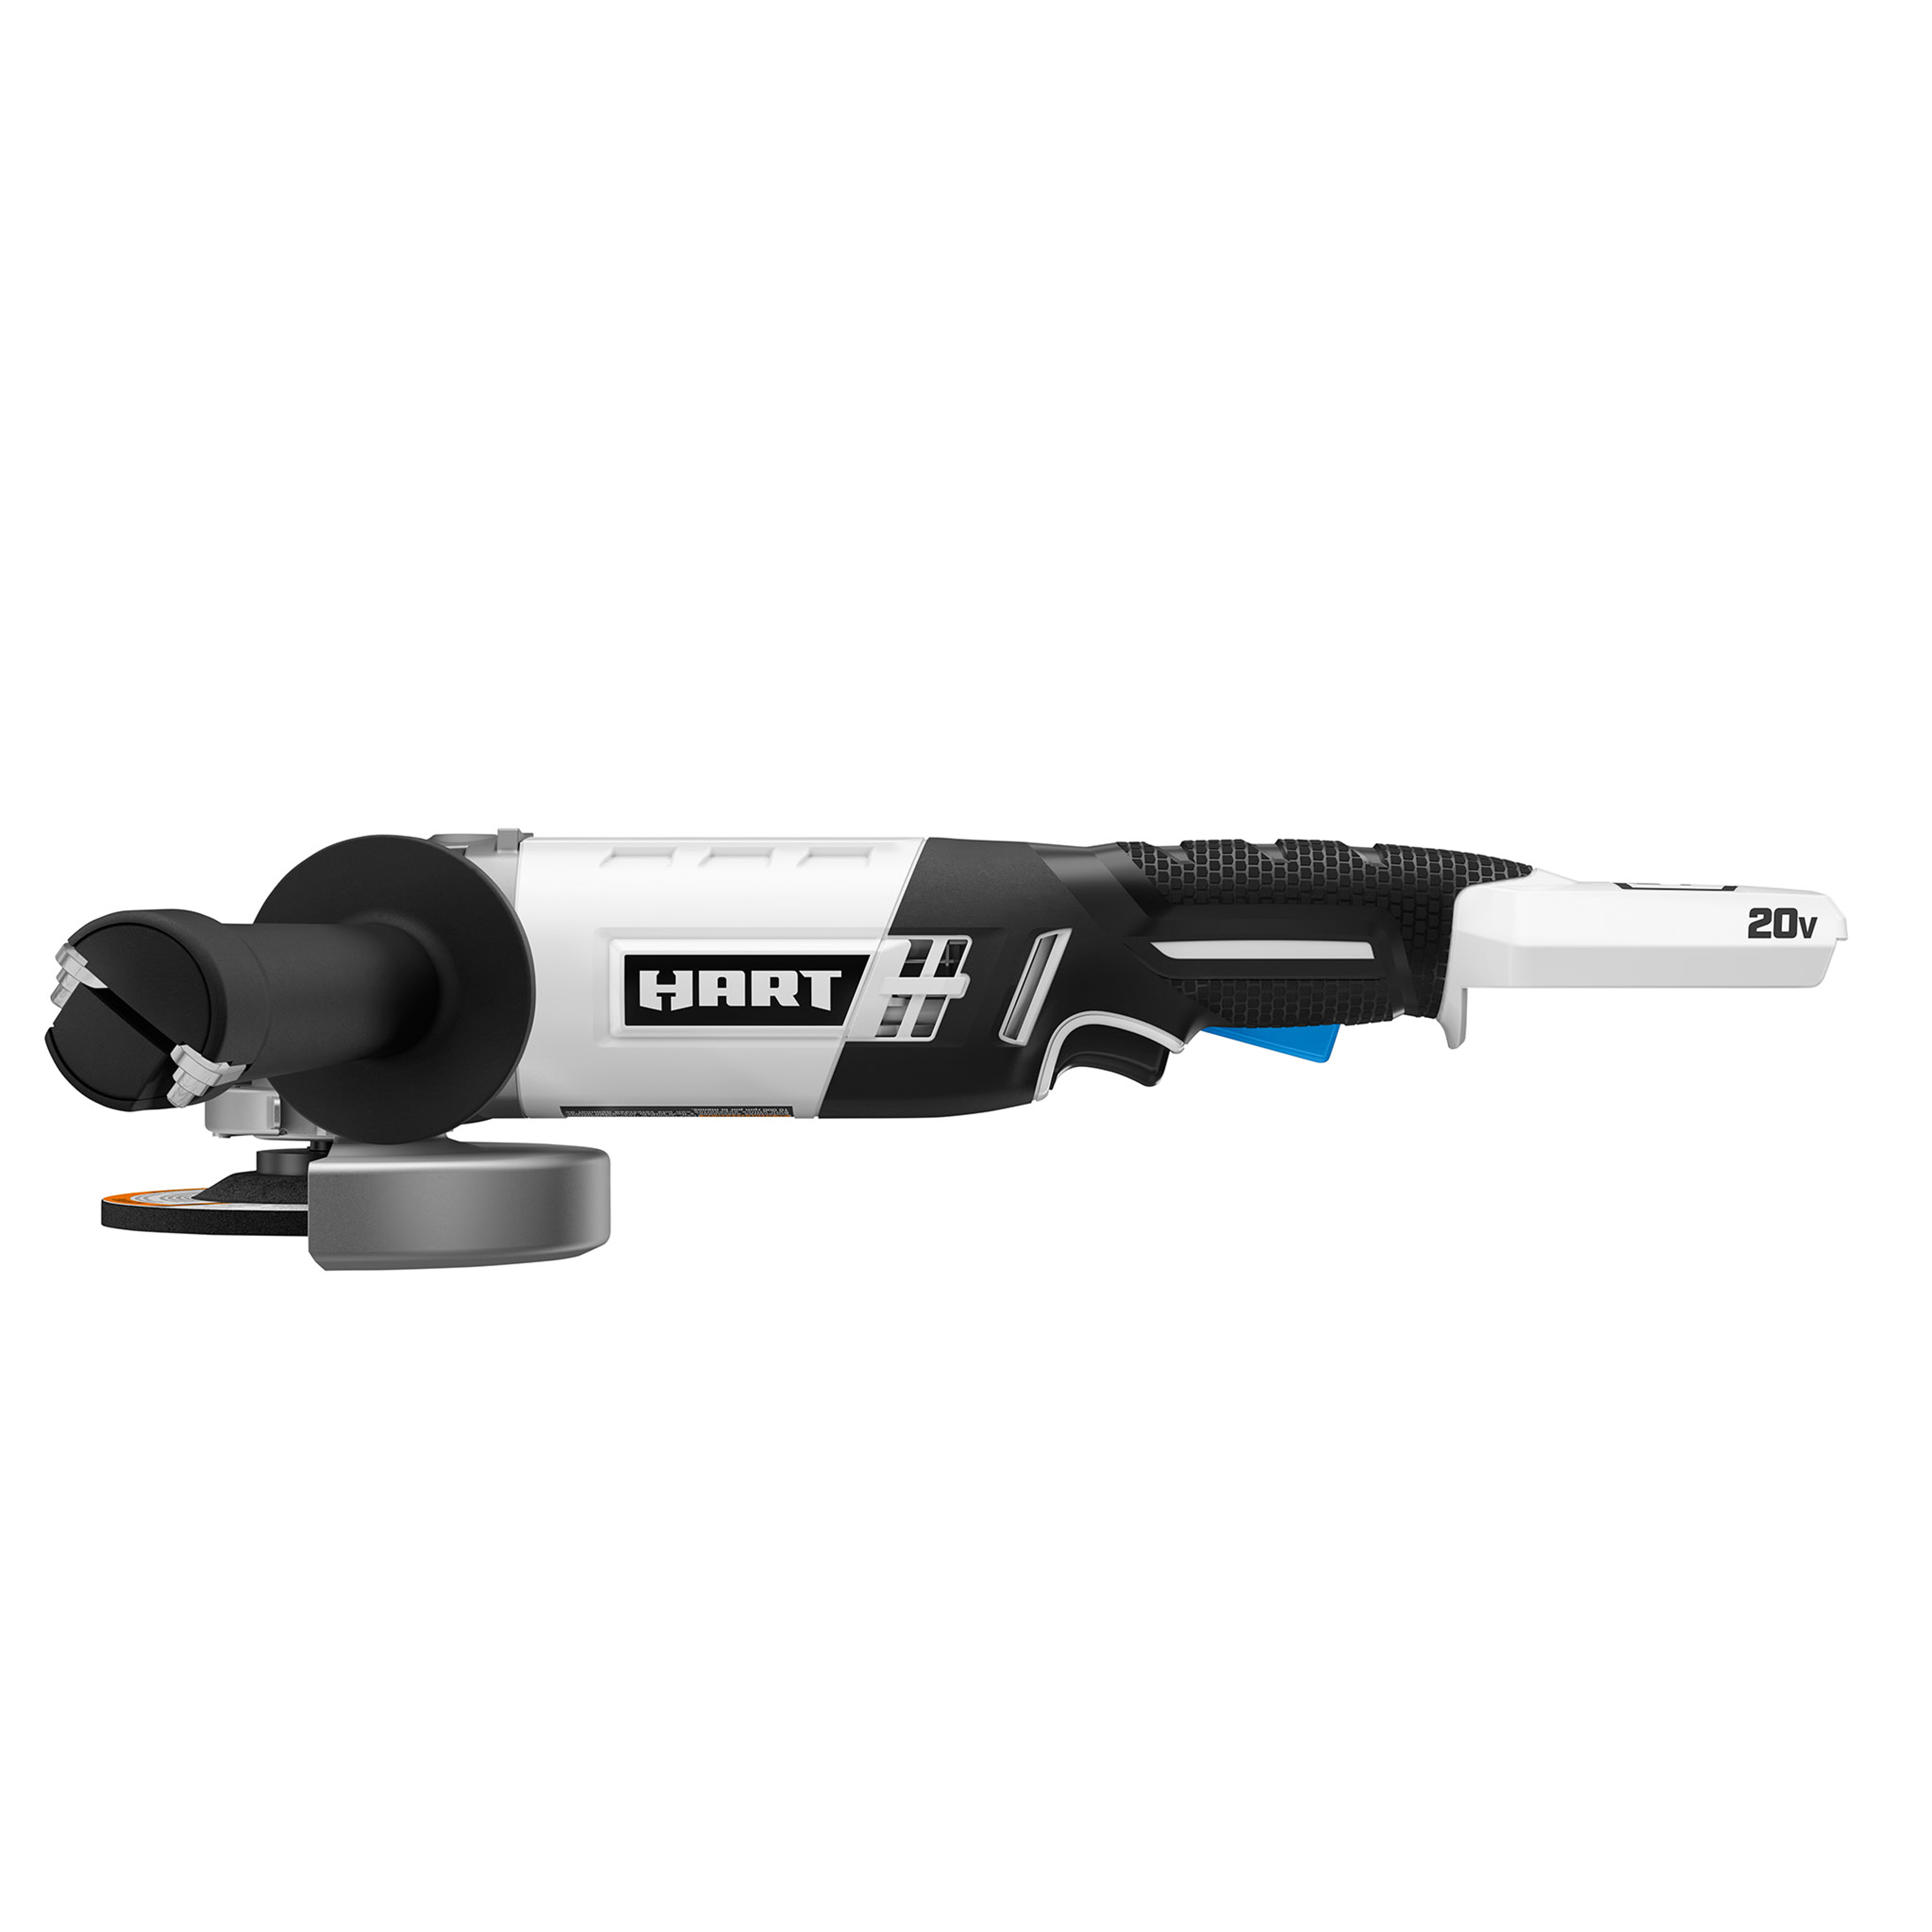 HART 20-Volt Cordless 4 1/2-inch Angle Grinder (Battery Not Included) - image 5 of 11